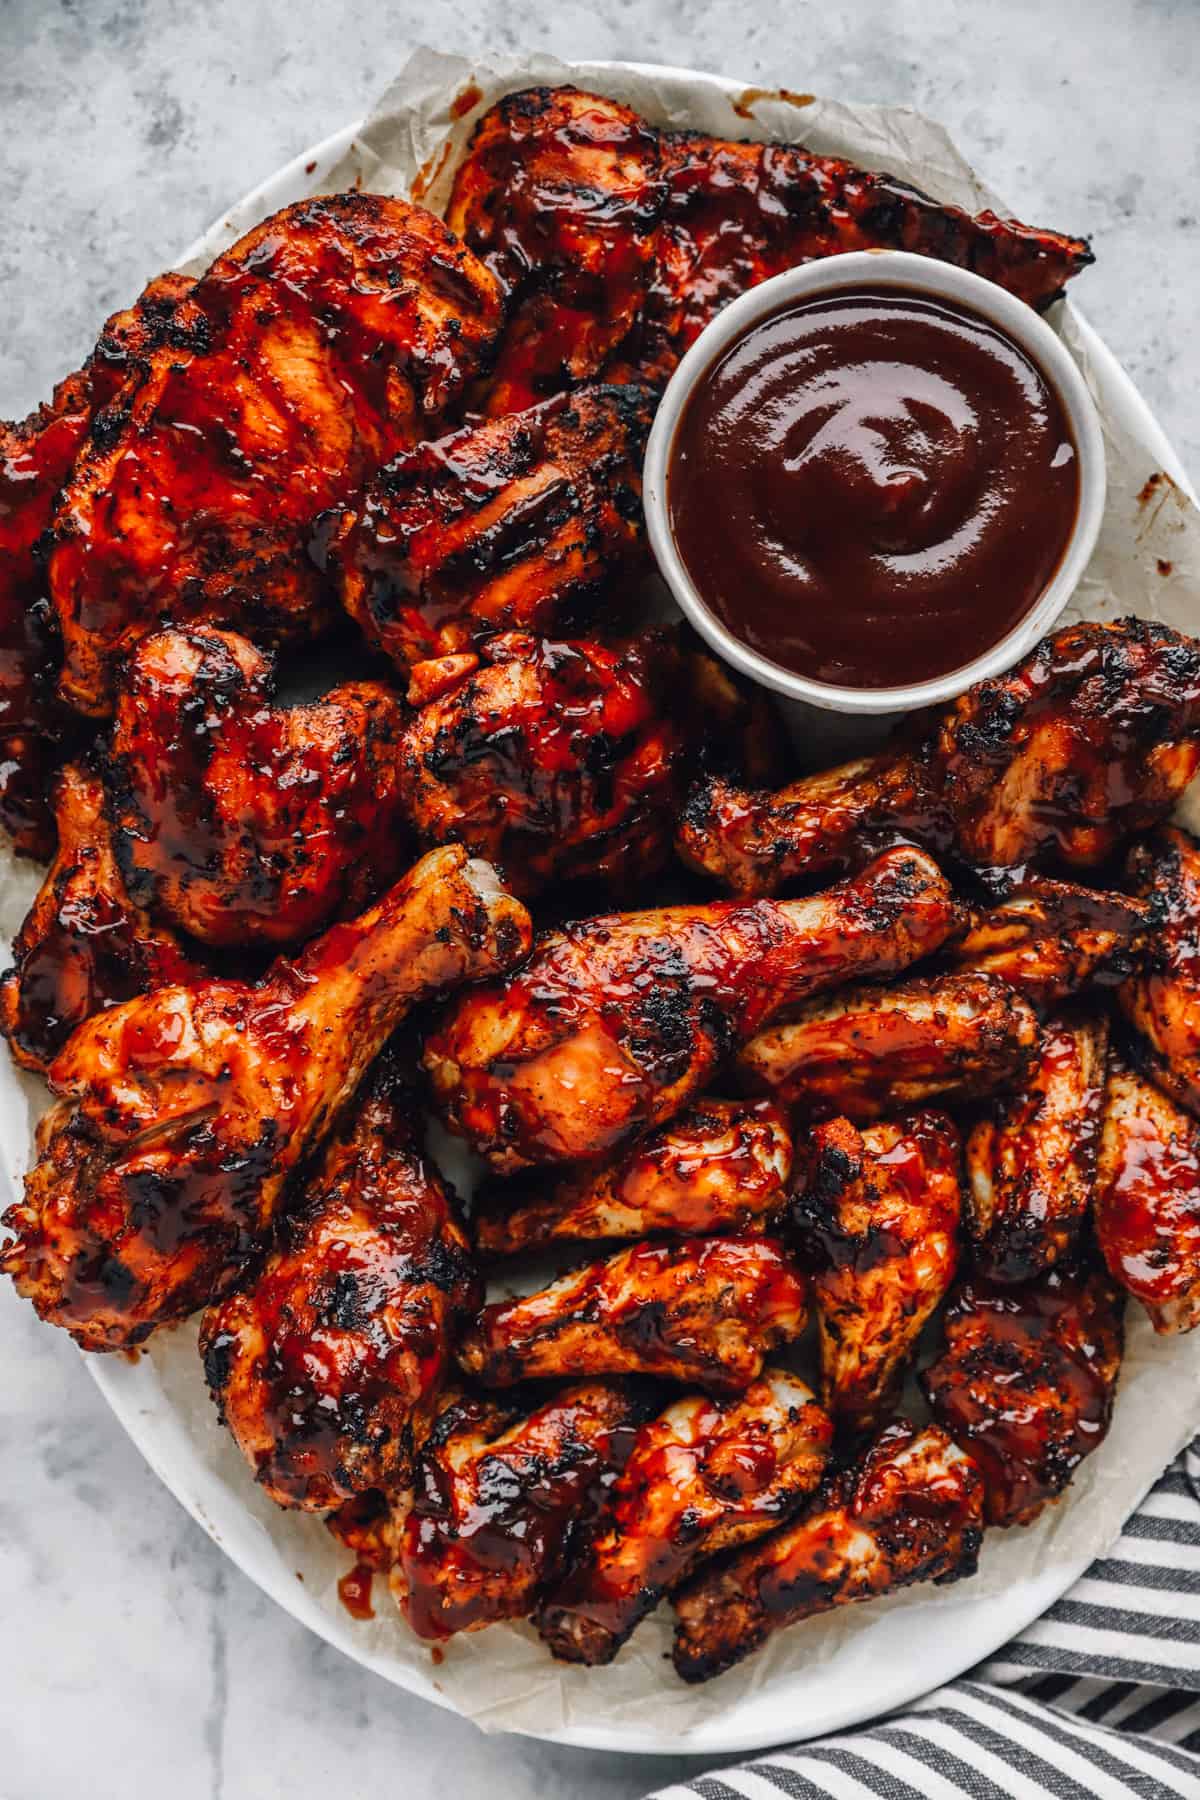 a plate of grilled BBQ chicken pieces, with a small bowl of BBQ sauce